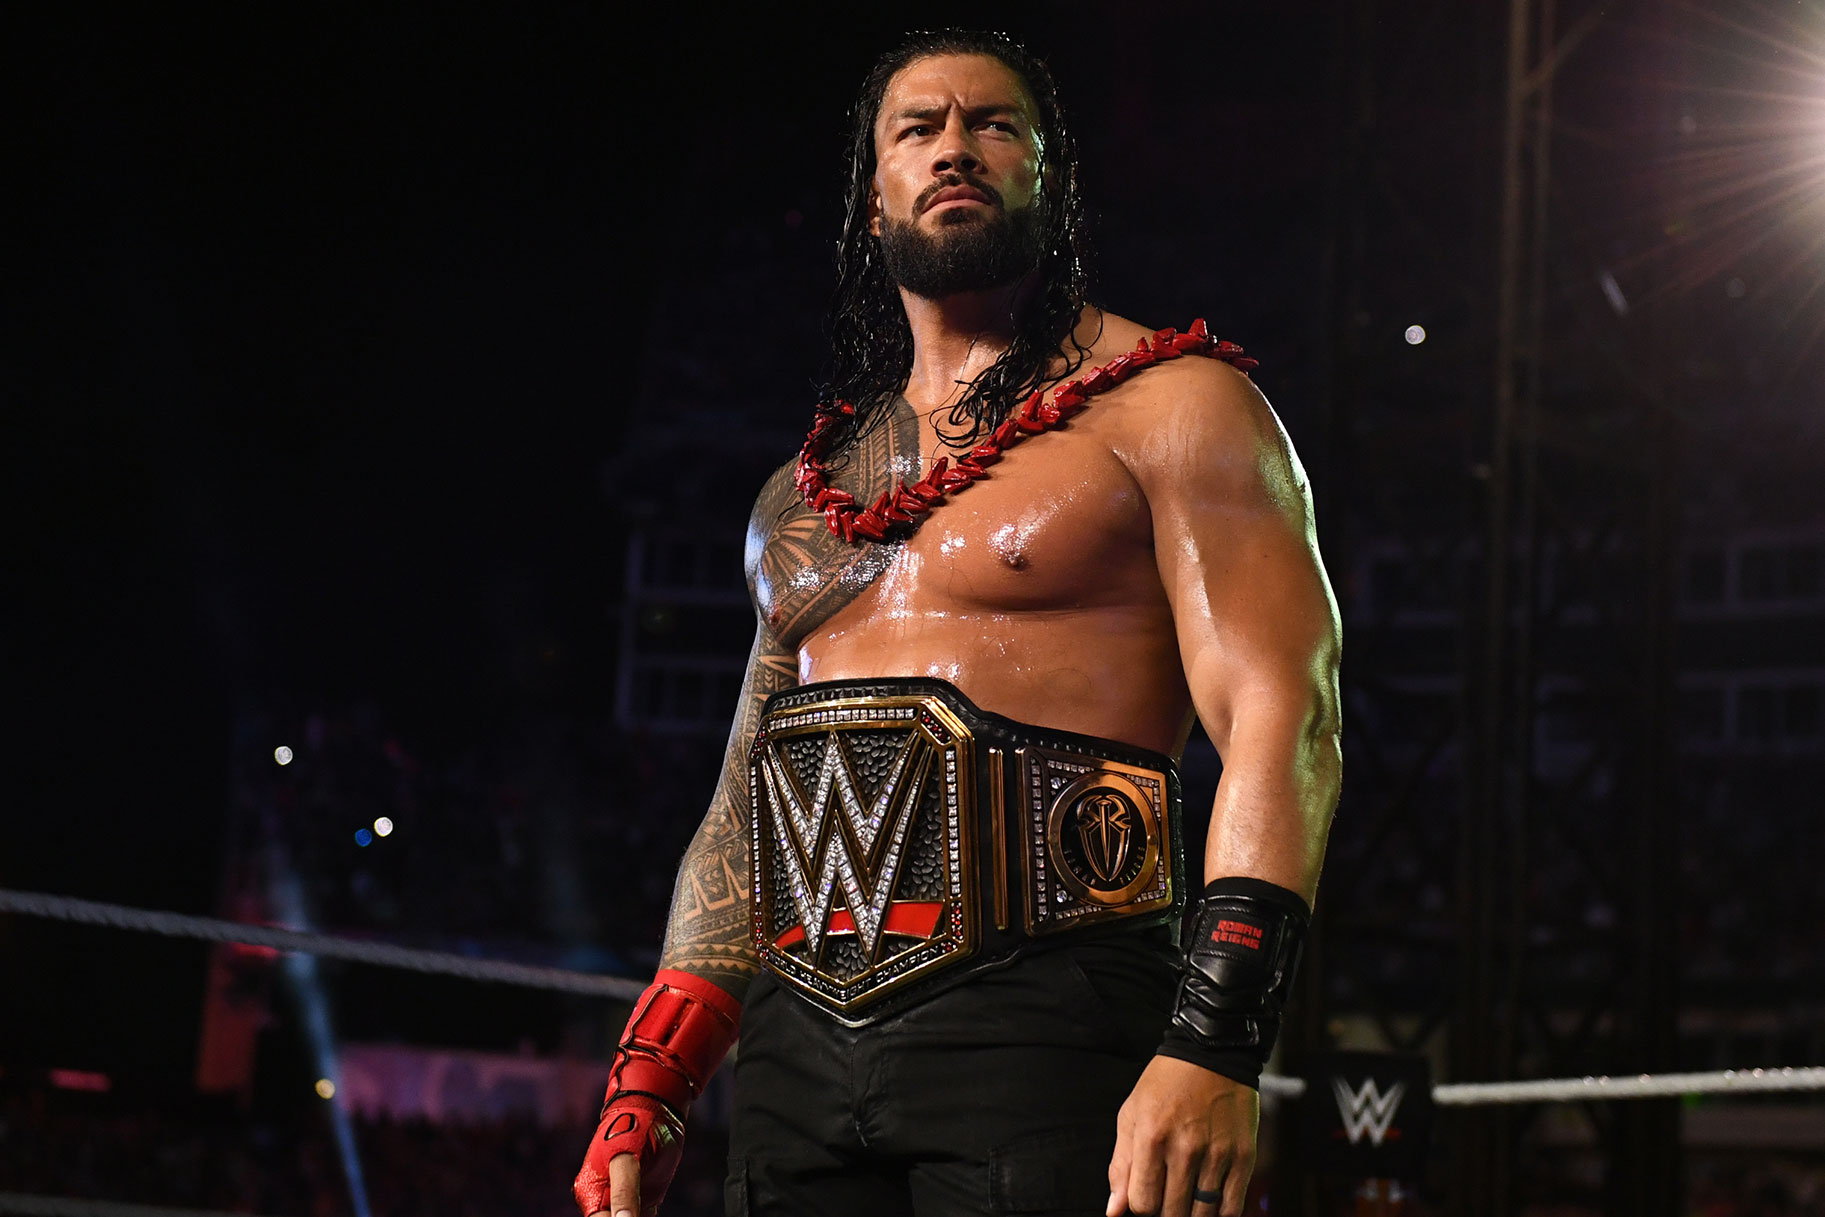 The Longest Wwe Championship Reigns In History Beyond Roman Reigns